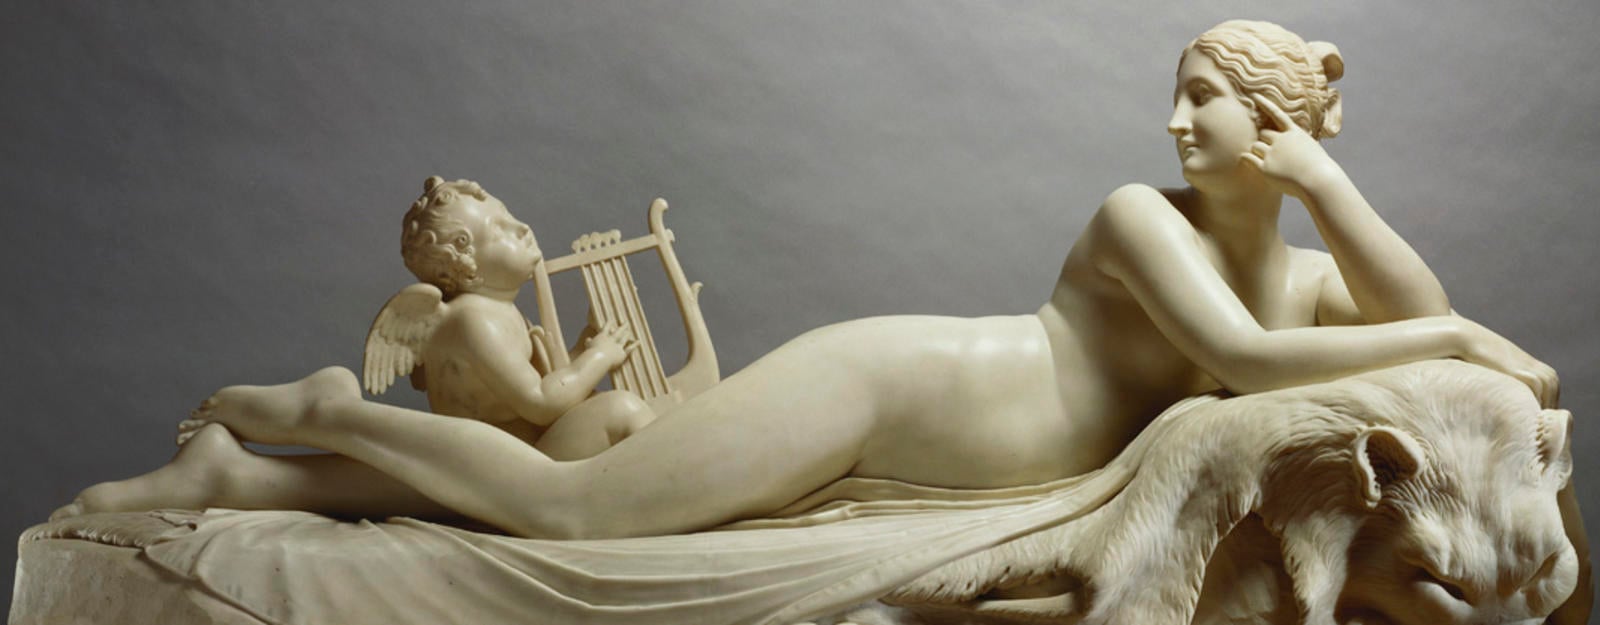 Nymph reclining with a nymph playing a lyre